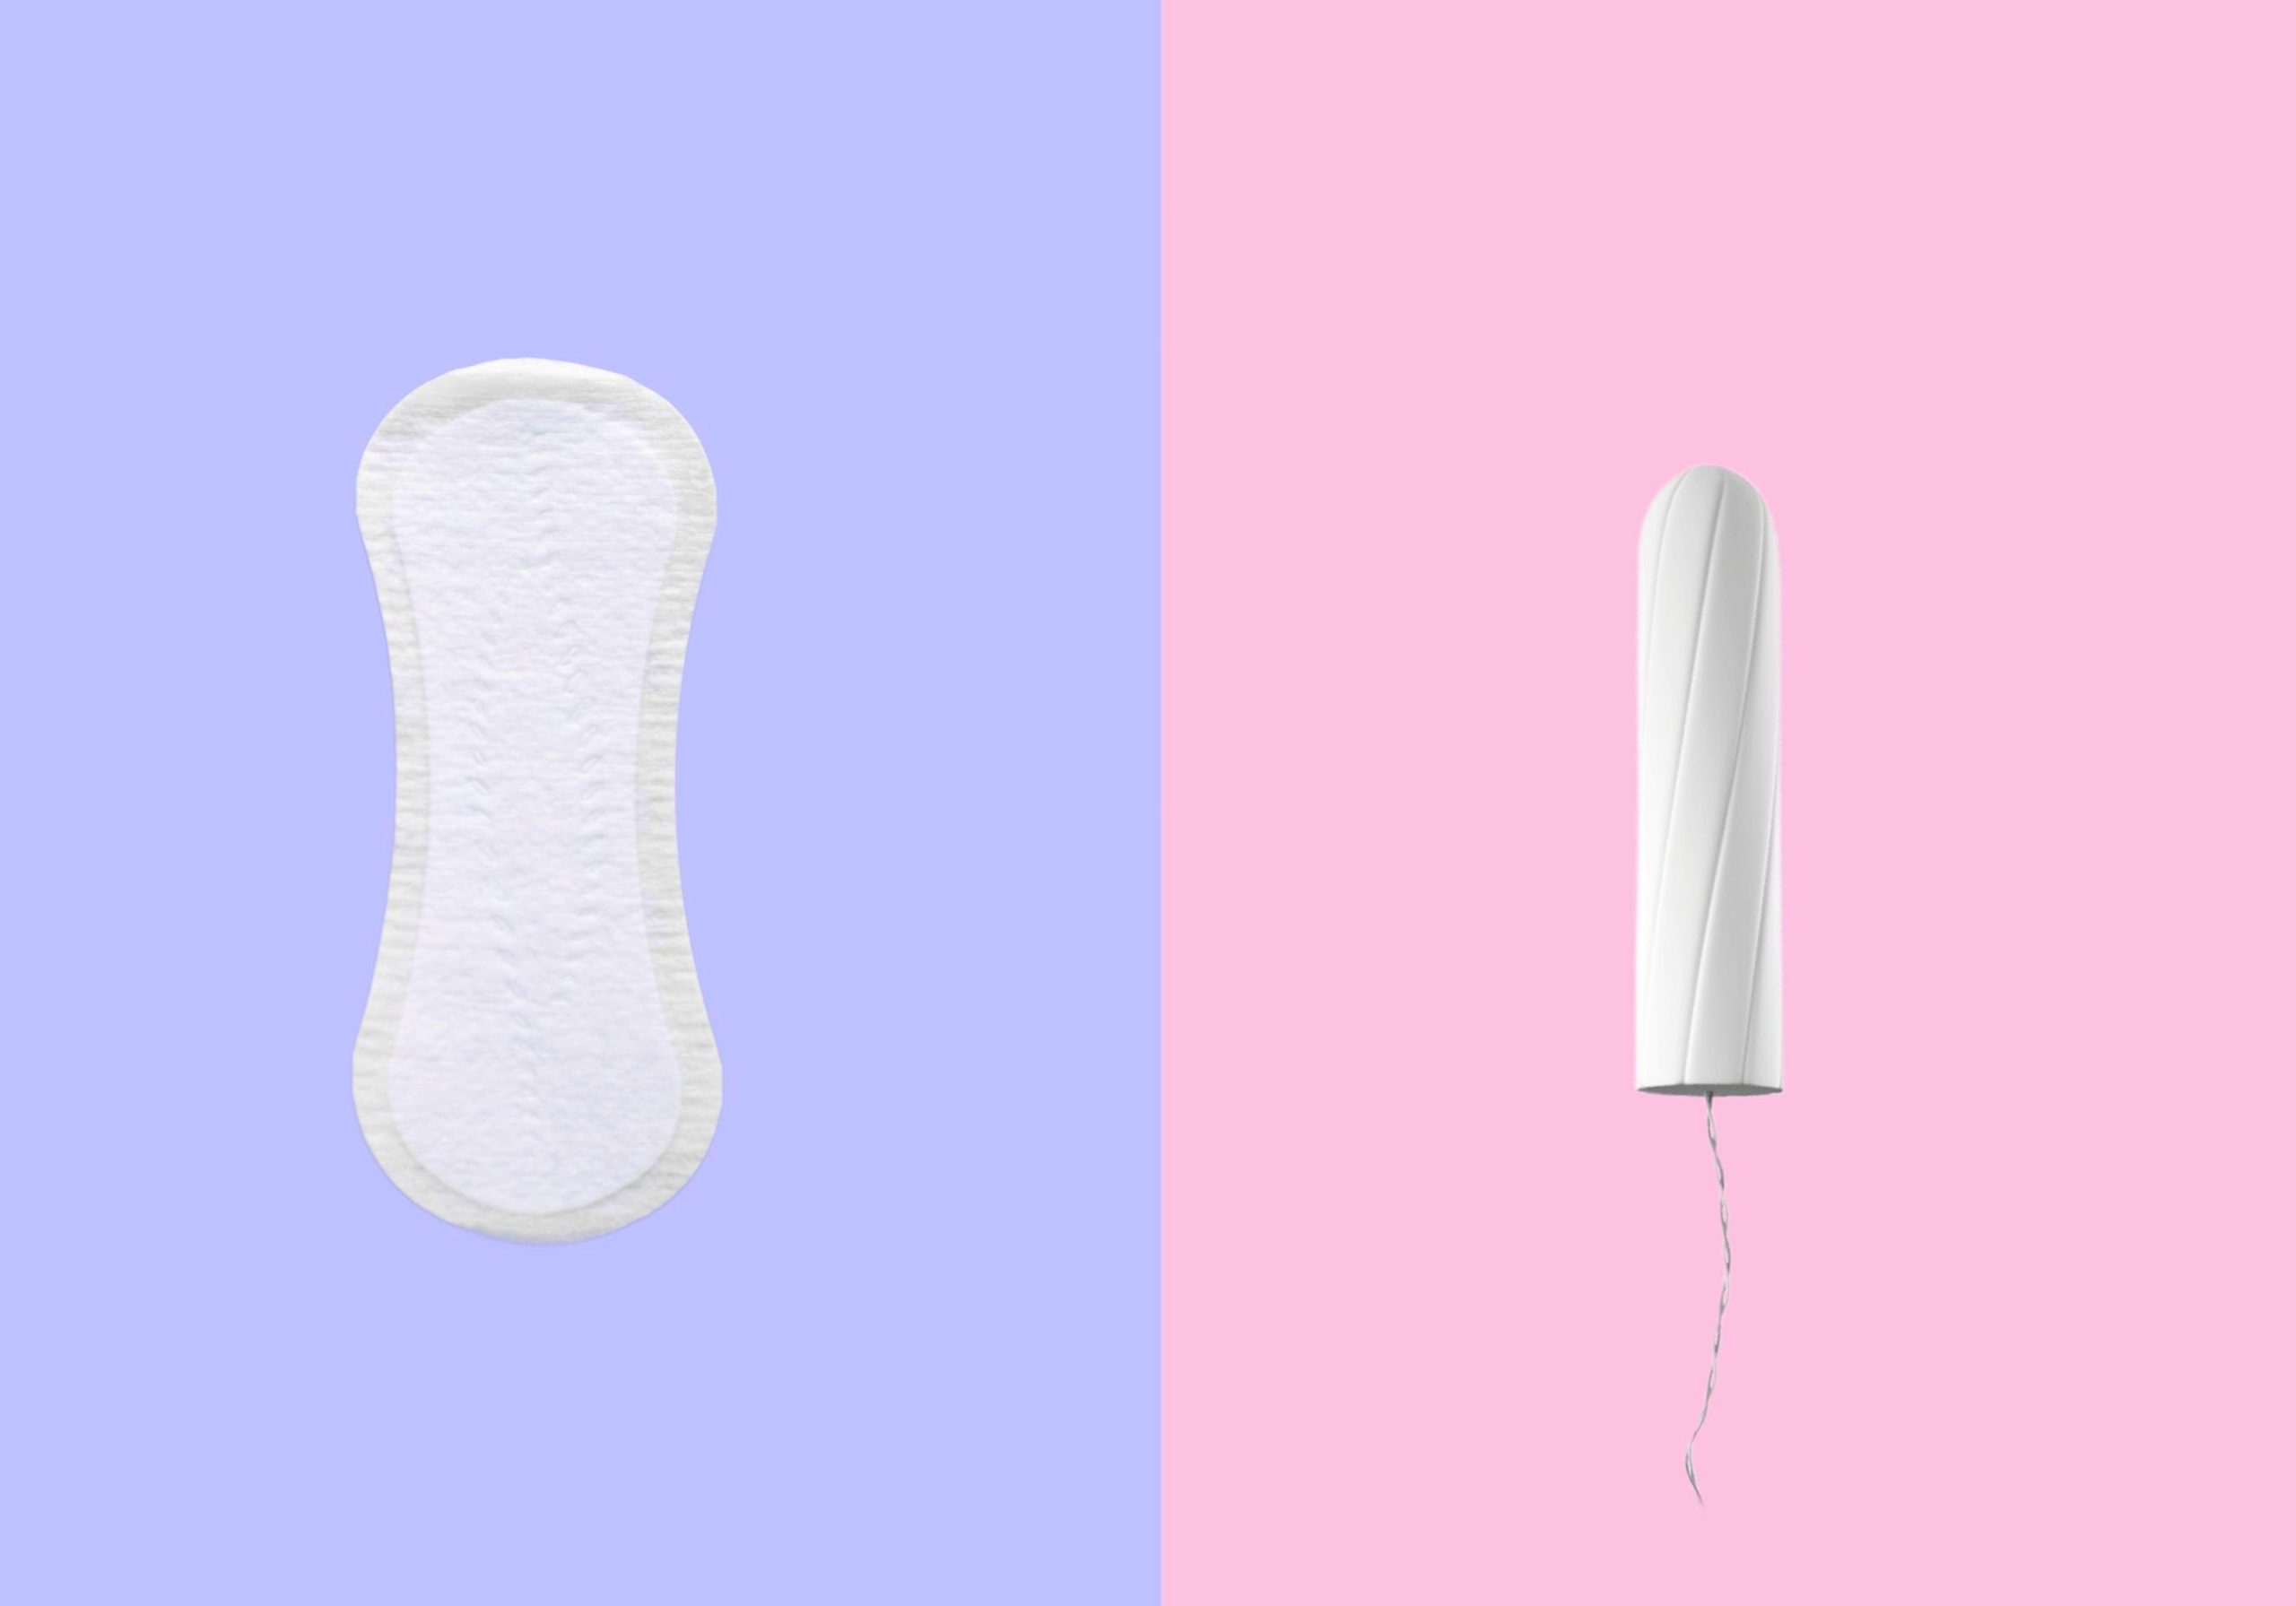 ‘Make menstruation products more easily accessible’